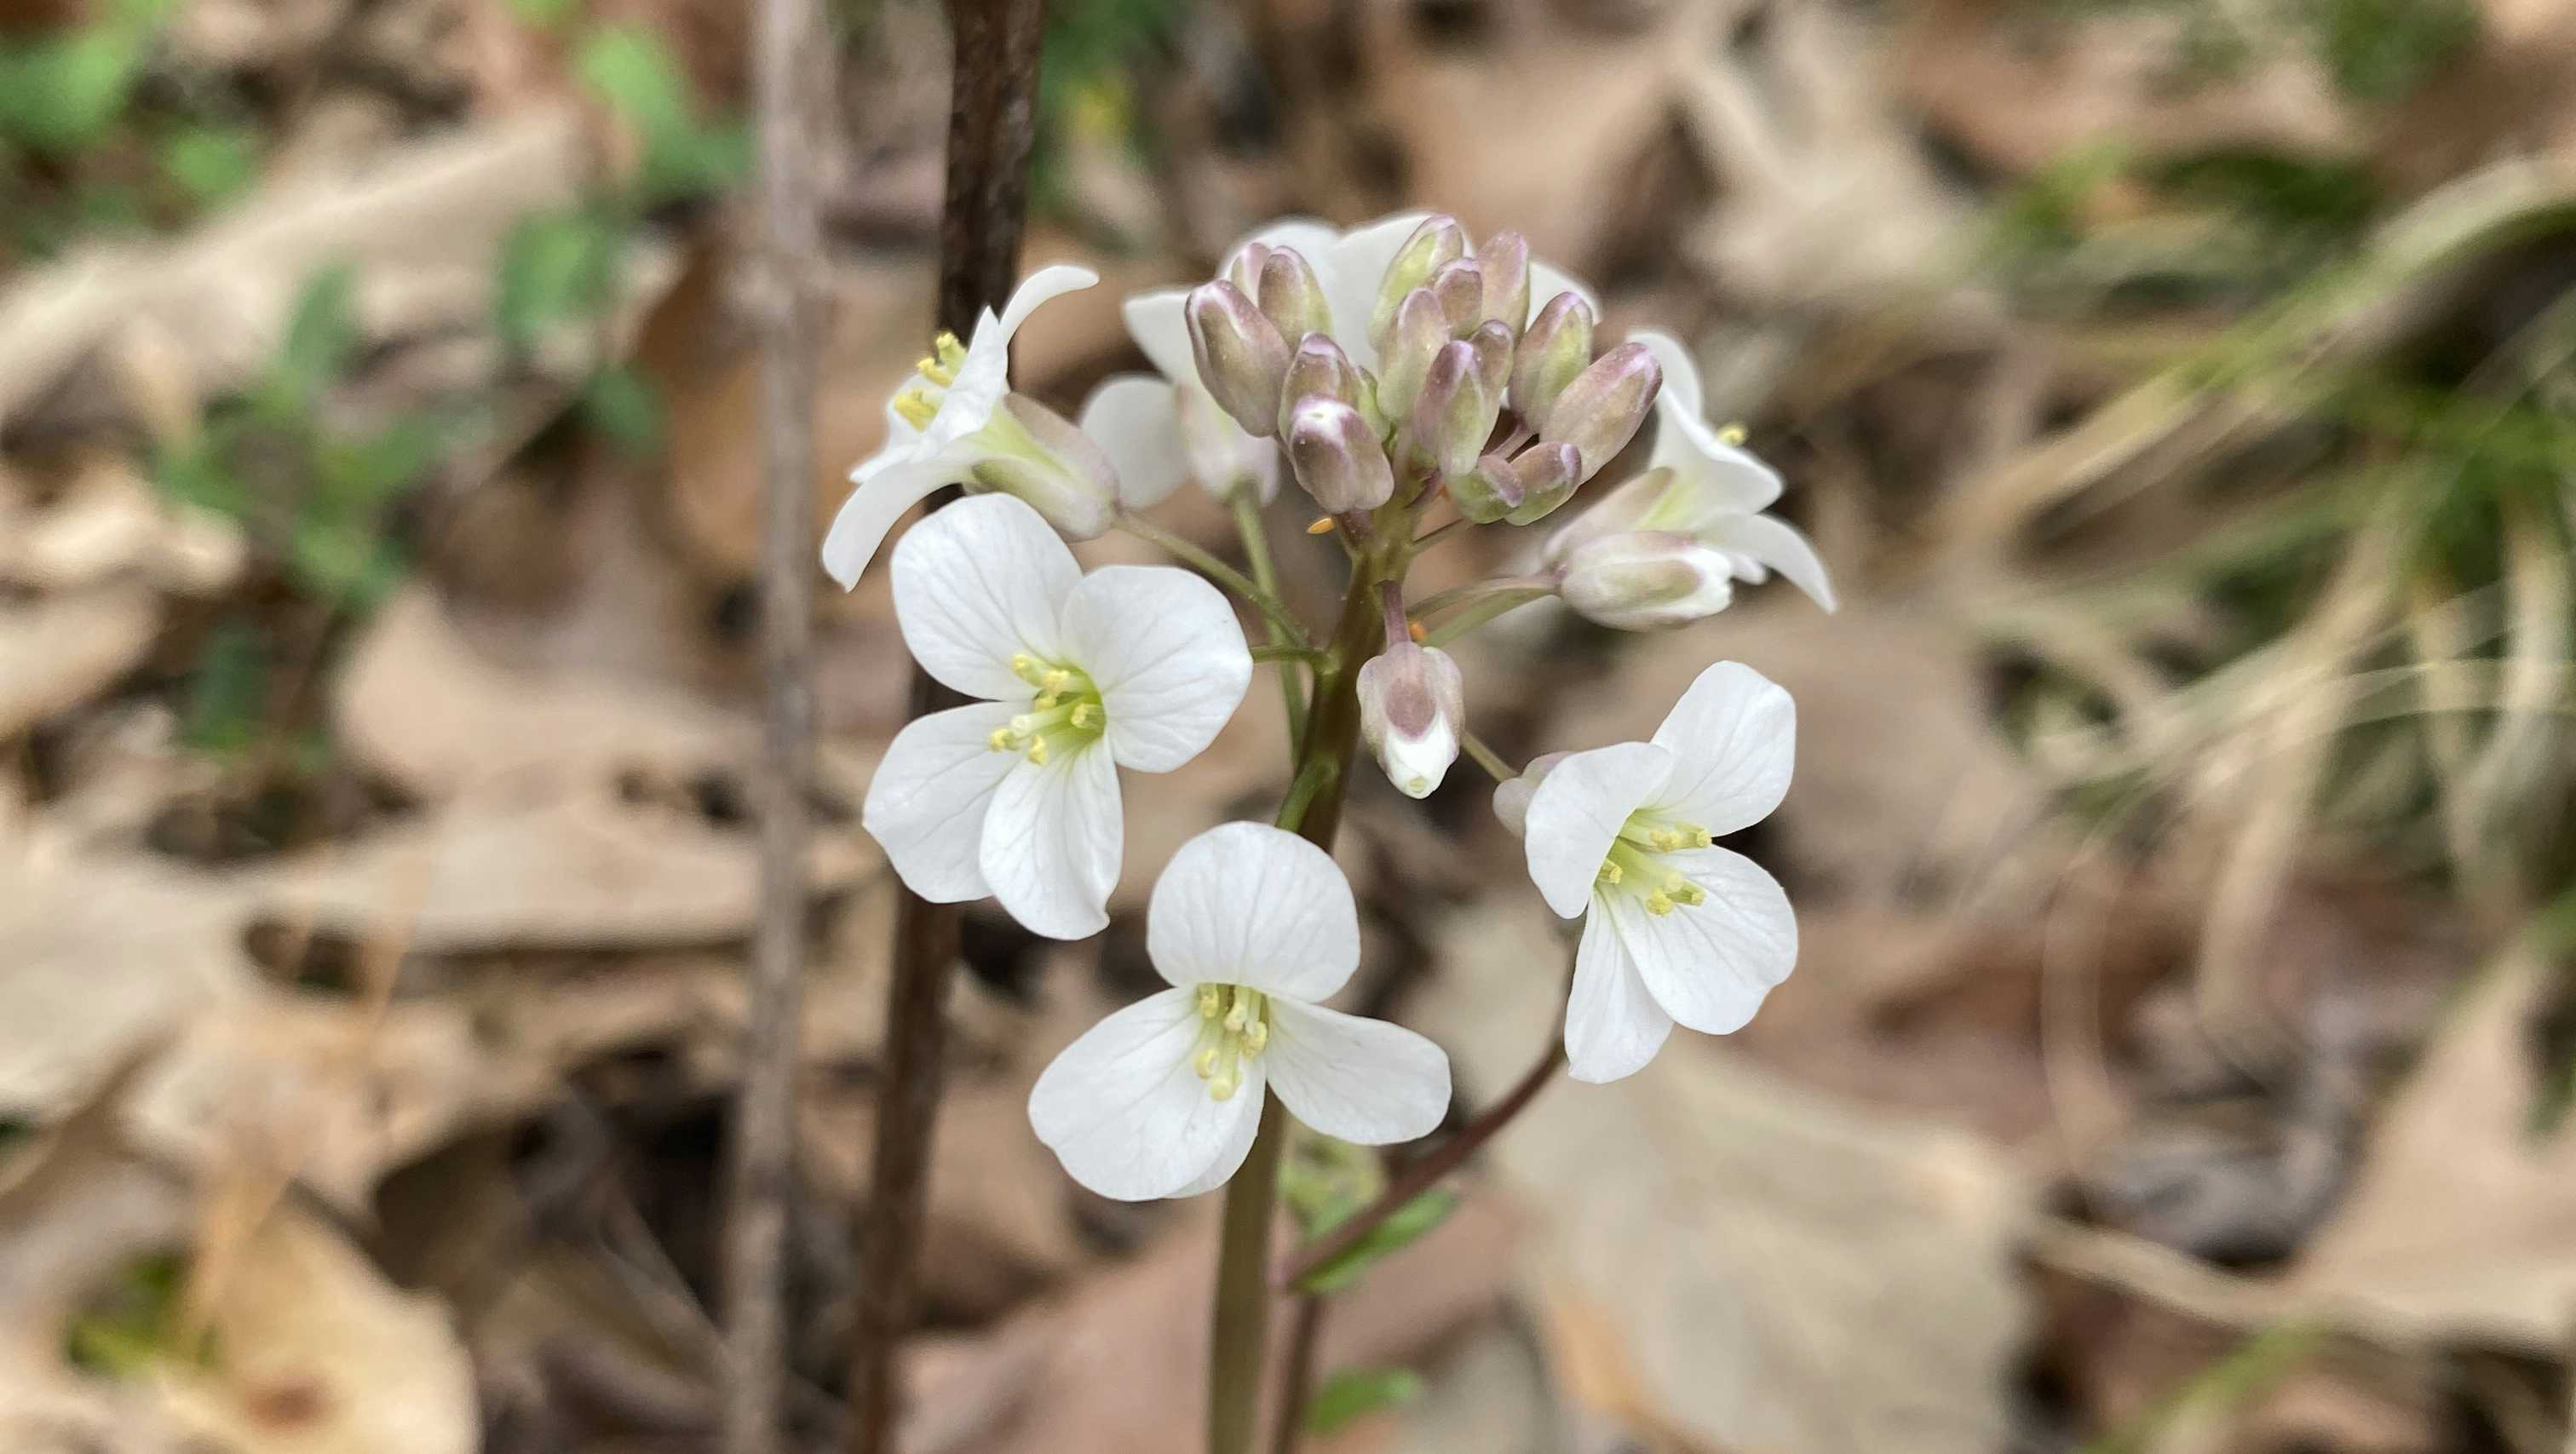 A bulb of small white flowers